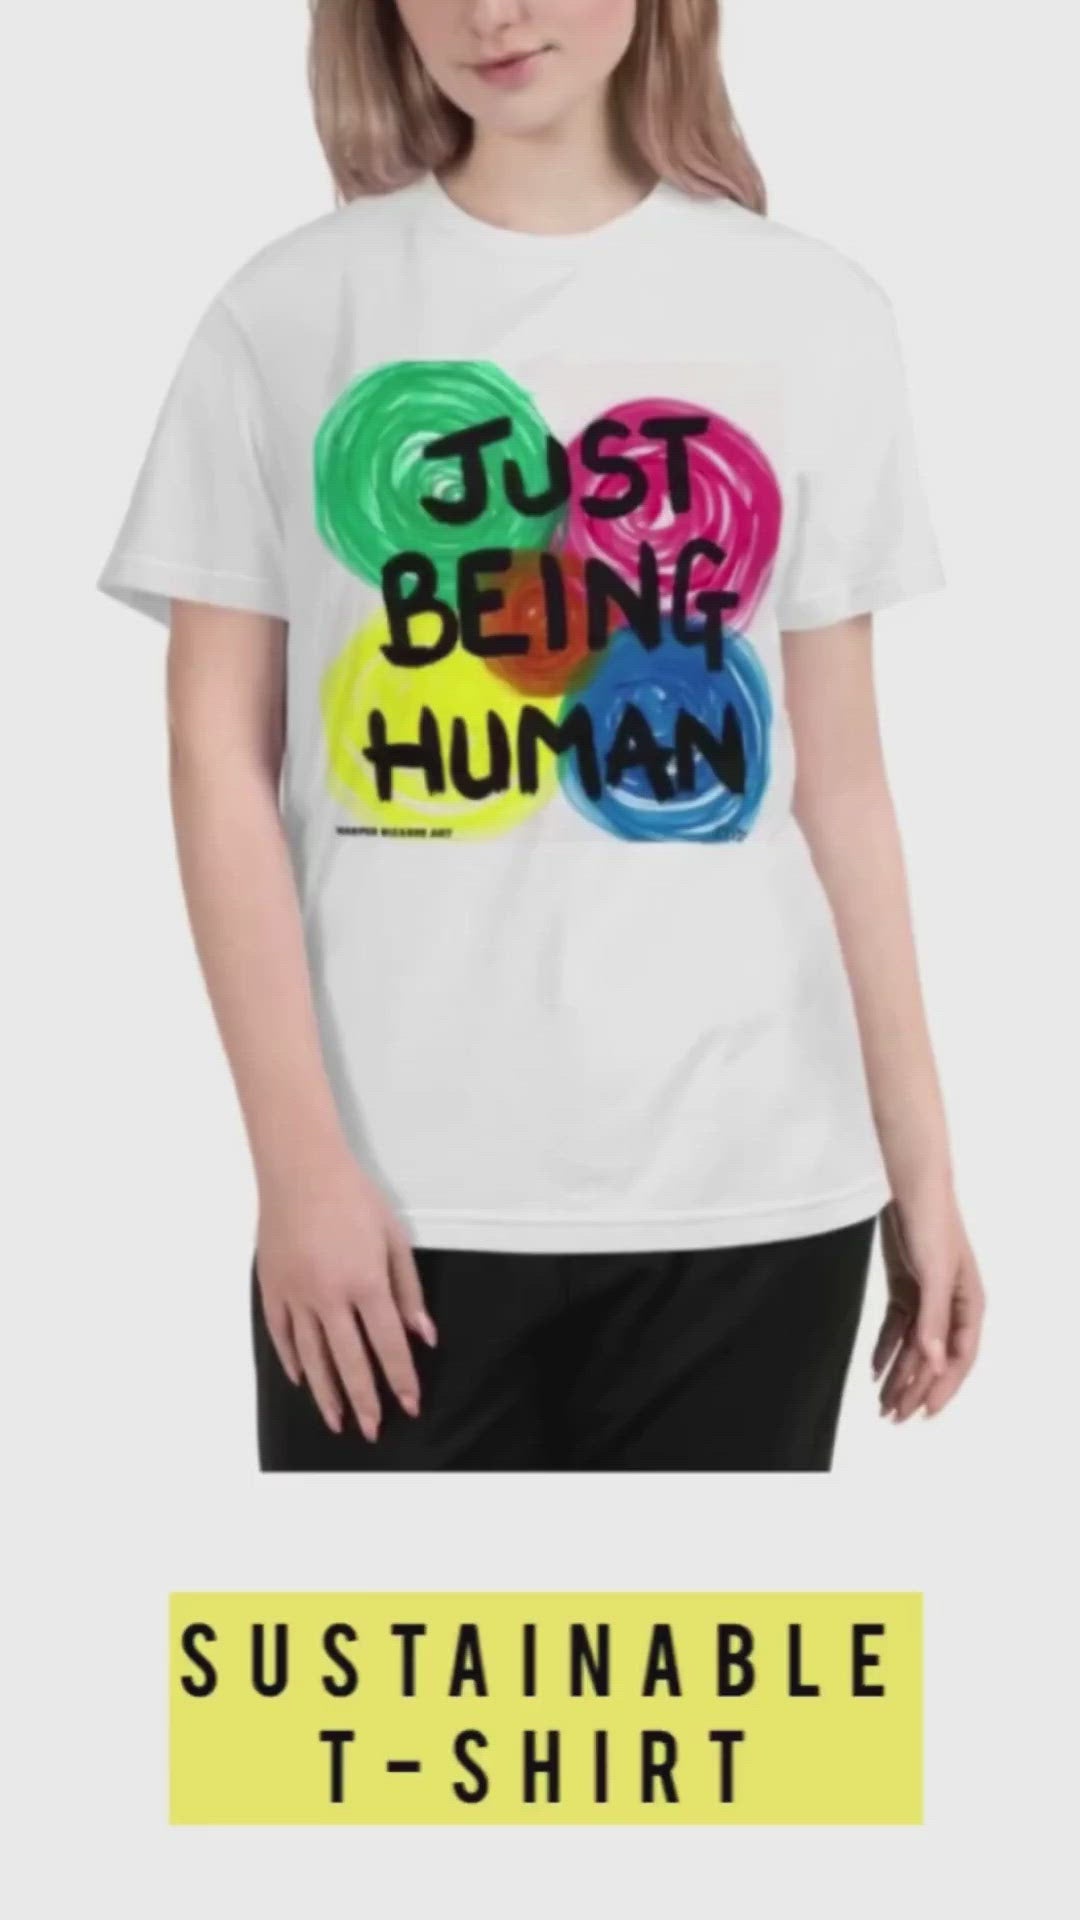 White tee-shirt with exclusive artwork "Just being human" print 